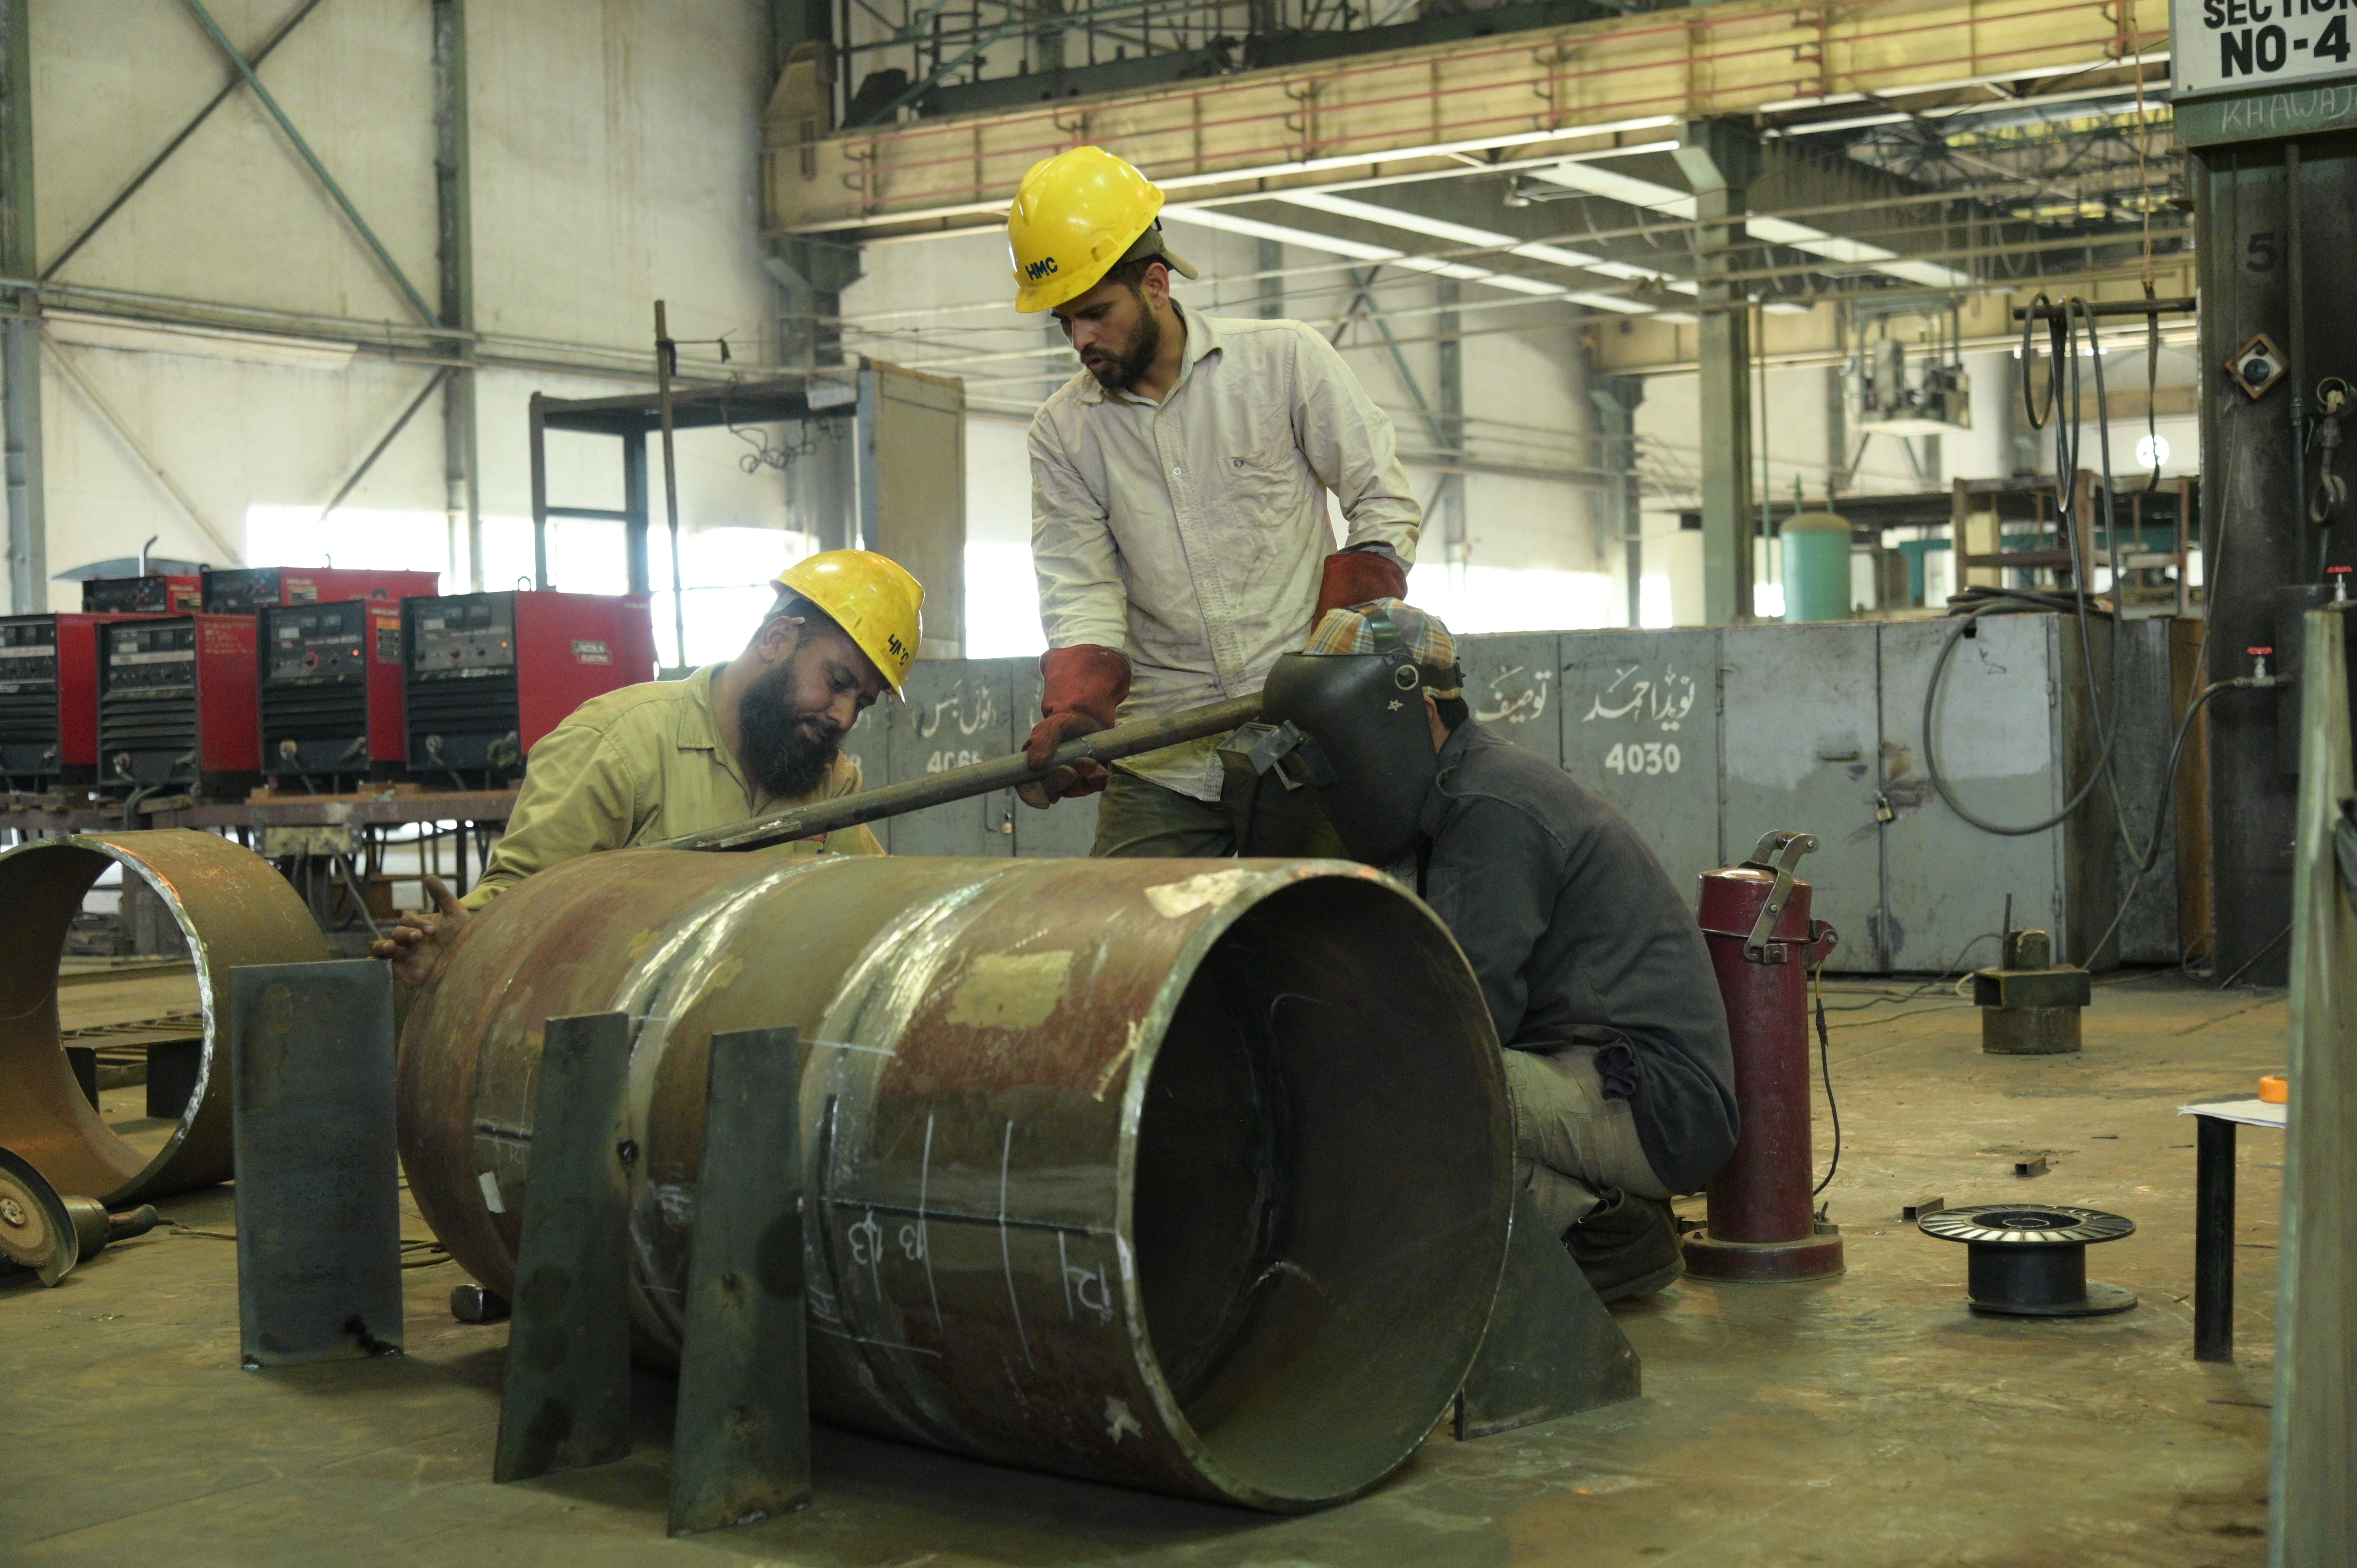 workers welding the large cylinders together